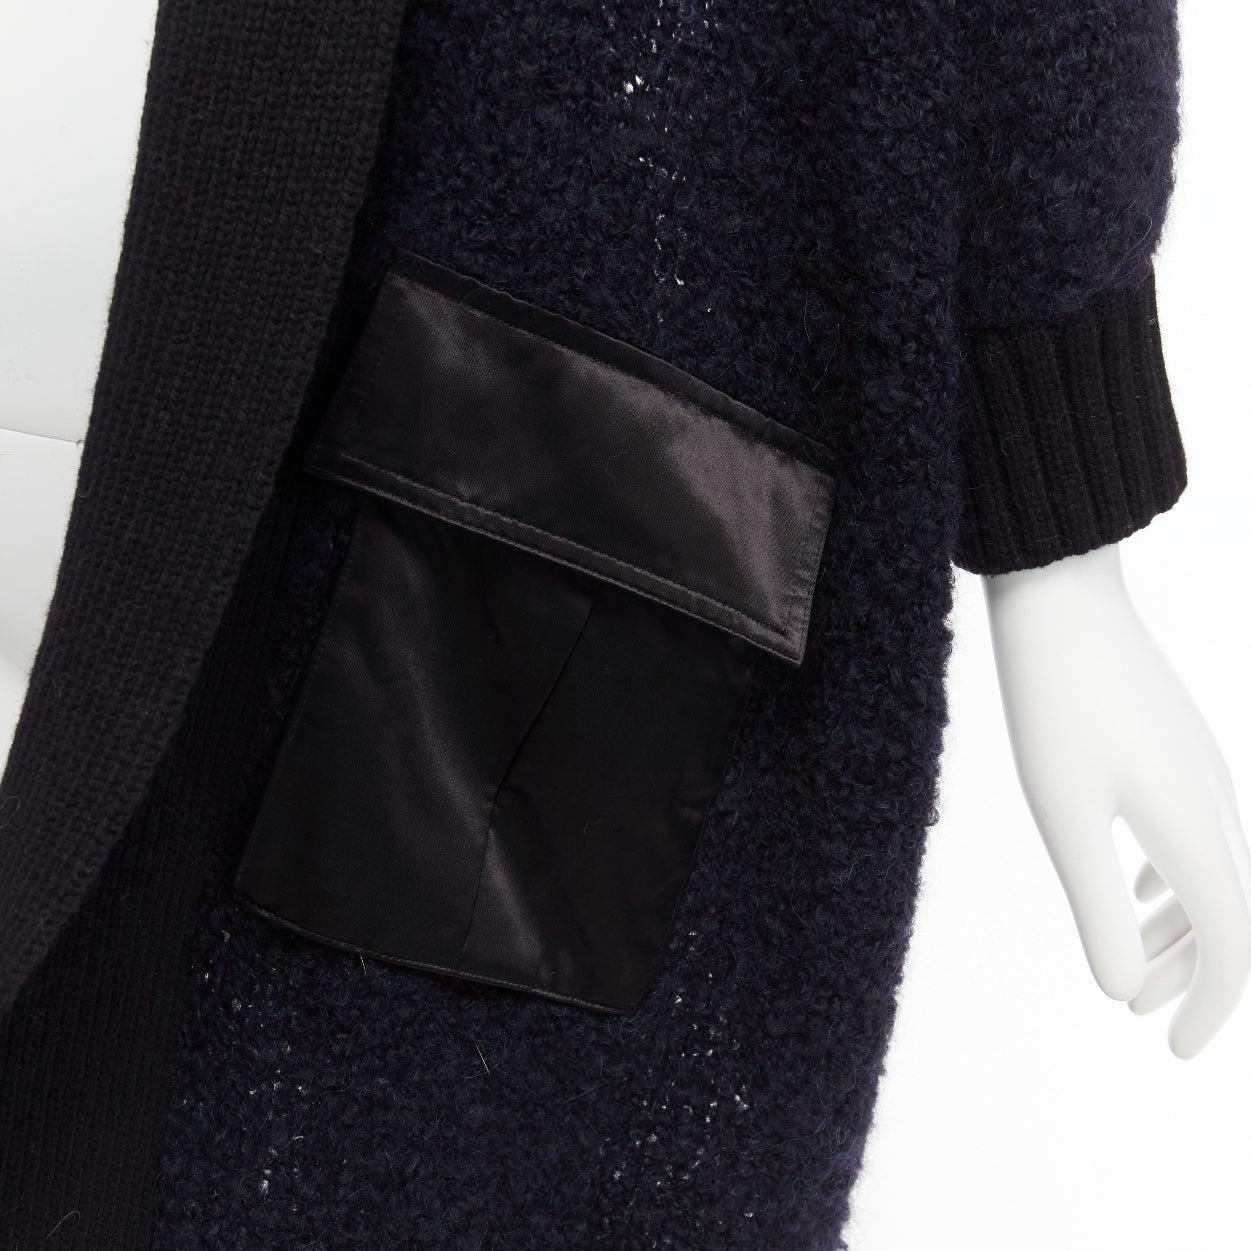 SACAI LUCK navy black boucle wool alpaca patch pocket cardigan JP2 M
Reference: DYTG/A00047
Brand: Sacai
Designer: Chitose Abe
Collection: LUCK
Material: Wool, Alpaca, Blend
Color: Navy, Black
Pattern: Solid
Extra Details: Flap pockets at